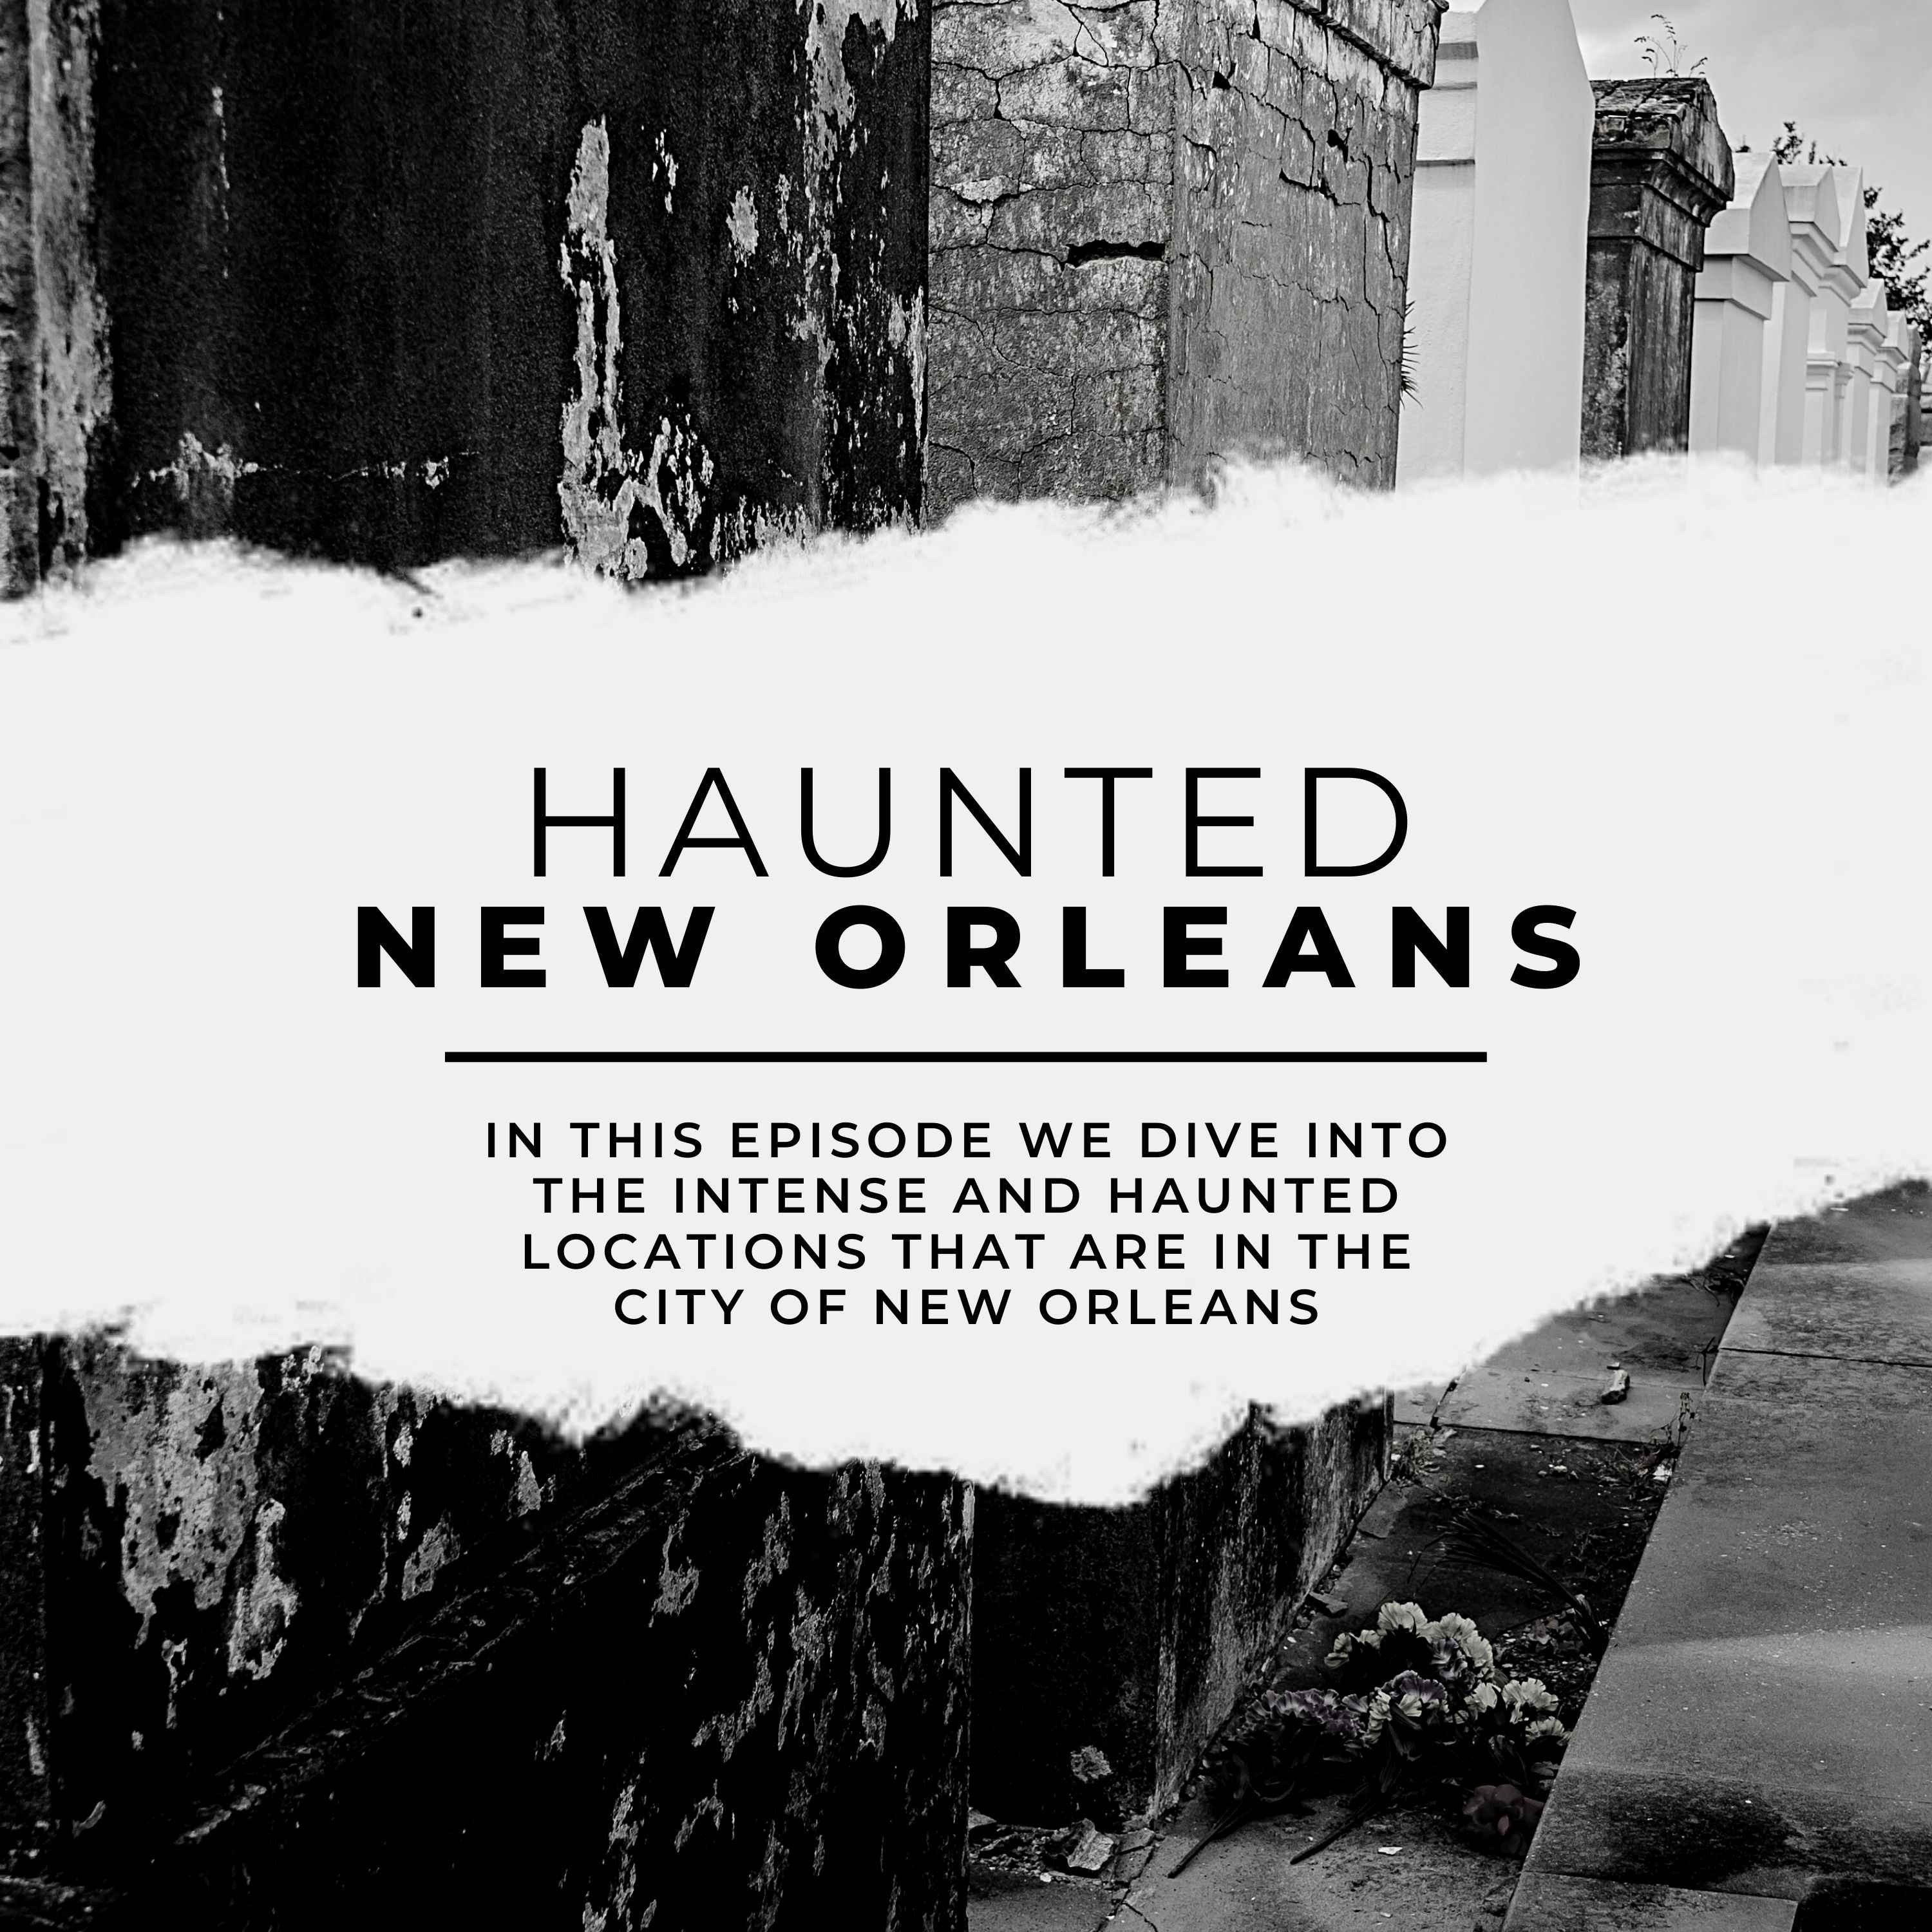 Haunted New Orleans [The Casket Girls, St. Louis Cemetery #1, Andrew Jackson Hotel, And Lalaurie Mansion] Image